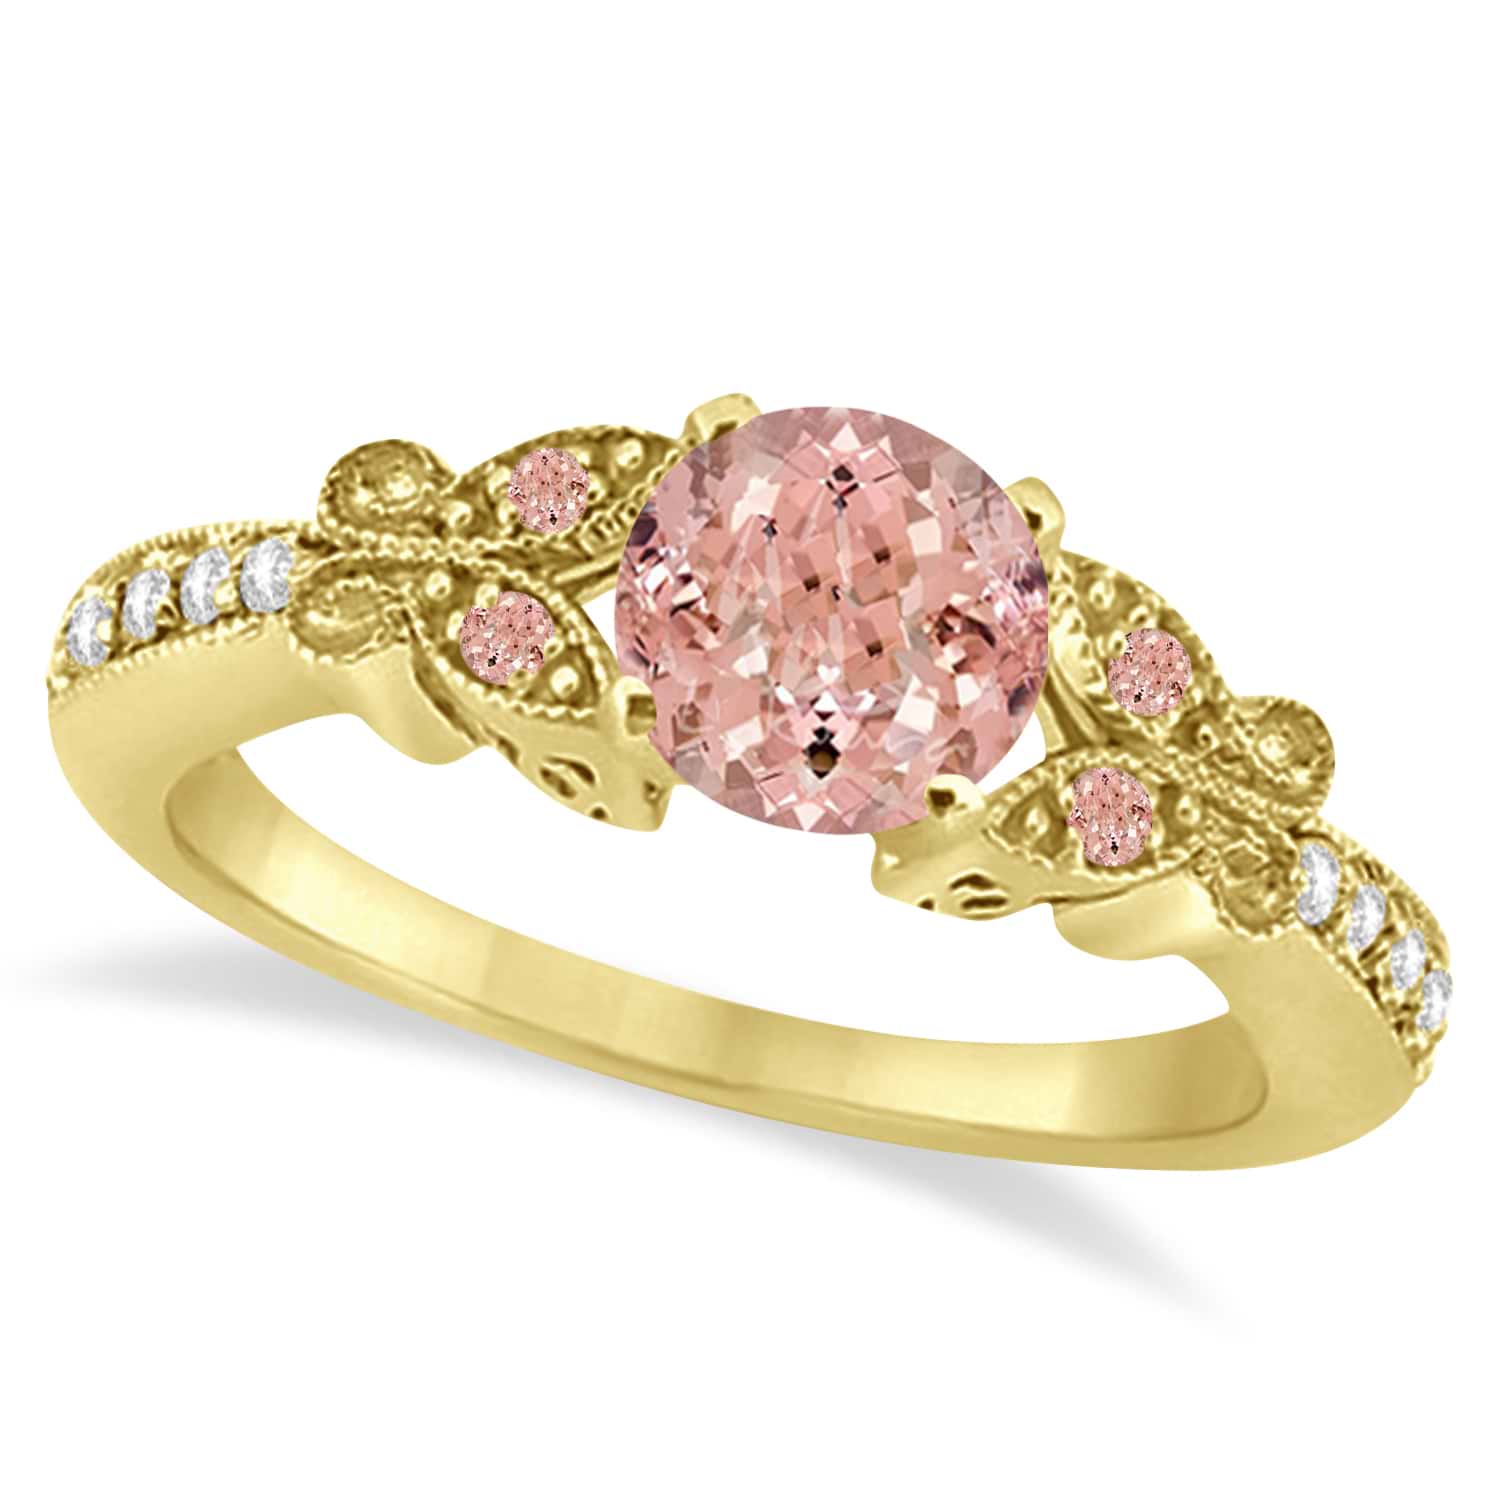 Butterfly Morganite & Diamond Engagement Ring 18K Yellow Gold 1.28ct